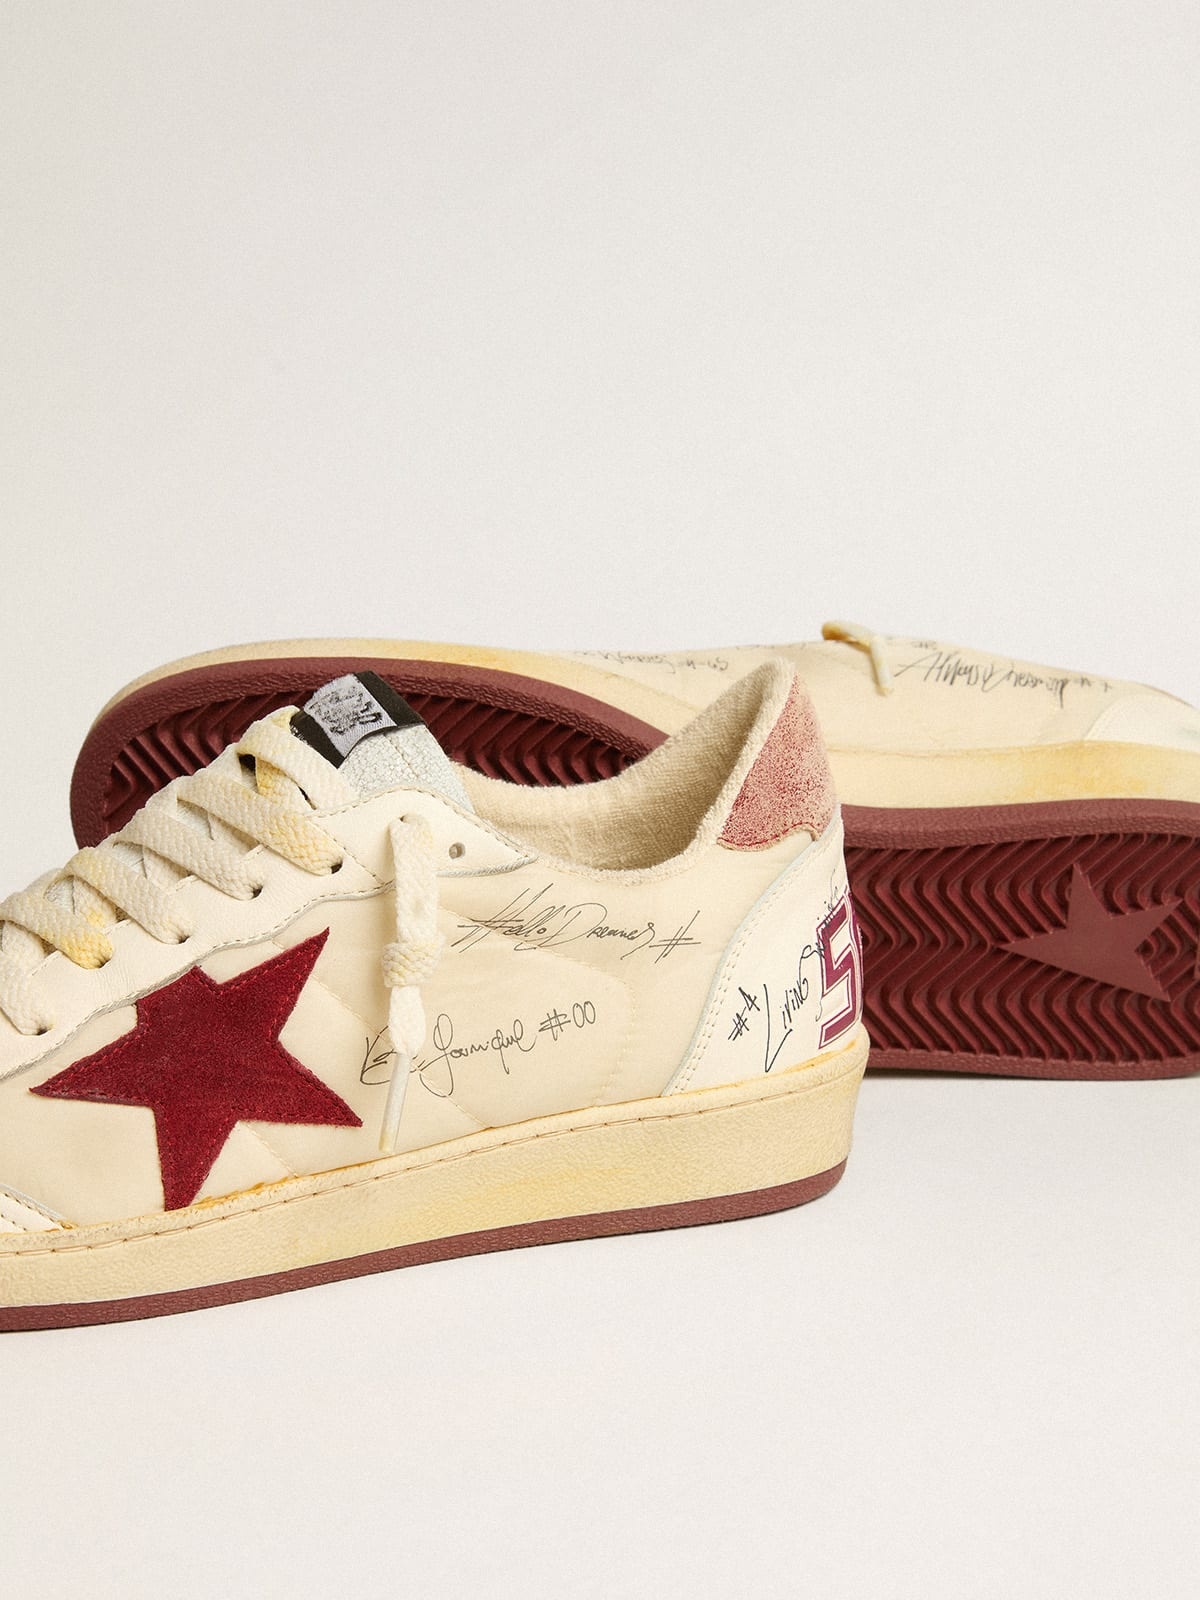 Ball Star LTD in nylon with pomegranate suede star and leather heel tab - 4